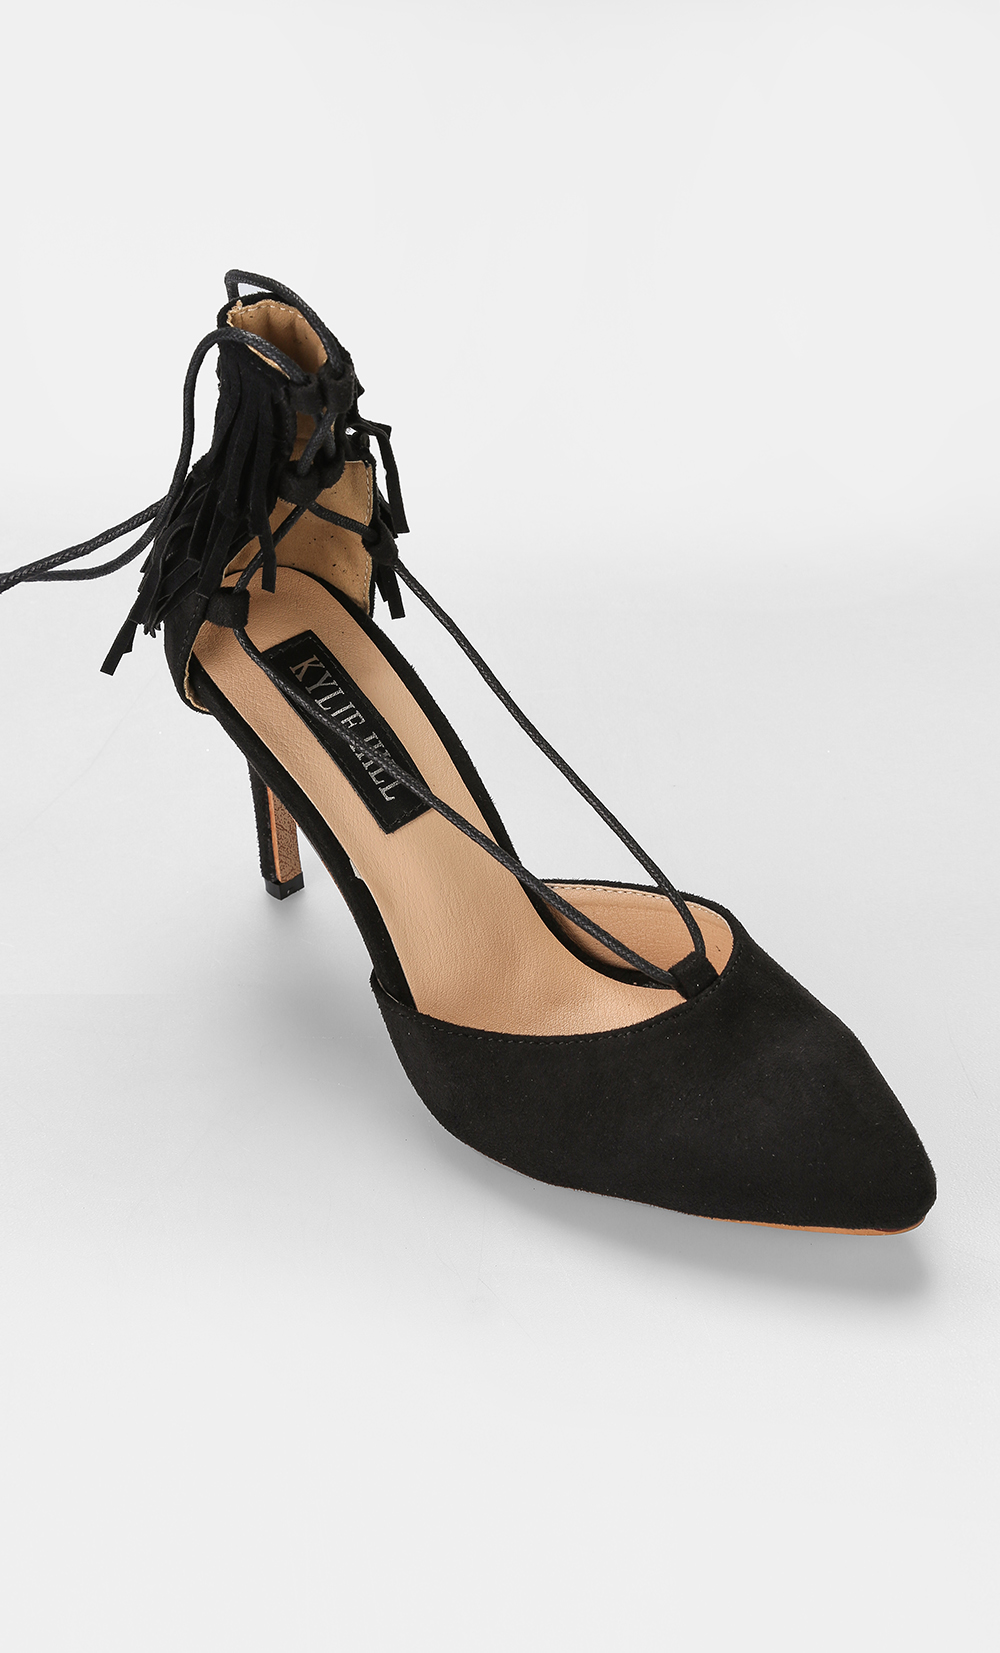 Kanya Lace Up Faux Suede Heels in Black | FashionValet